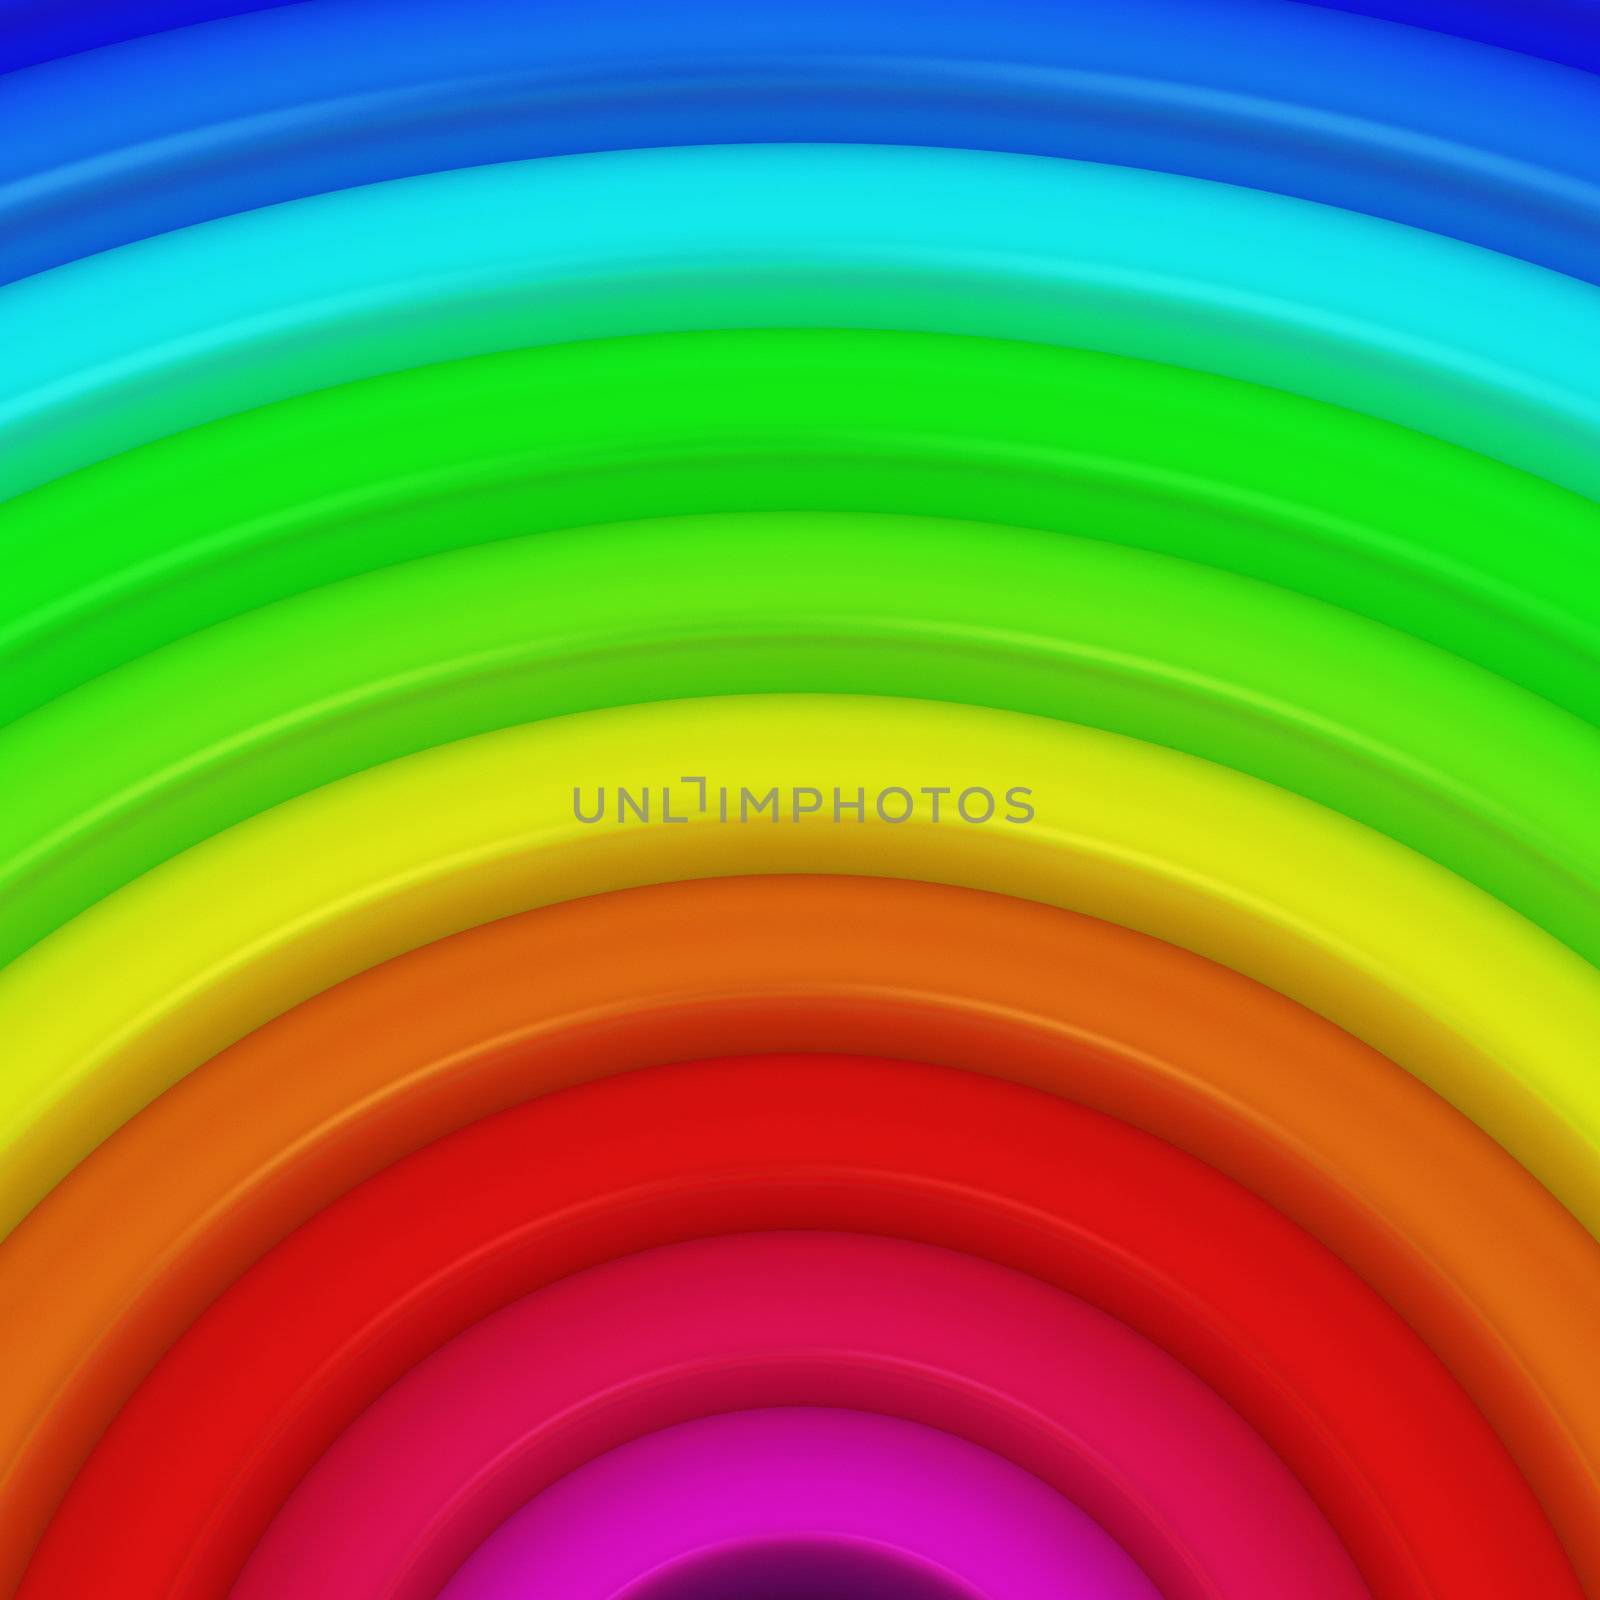 Segment of rainbow as a colorful background